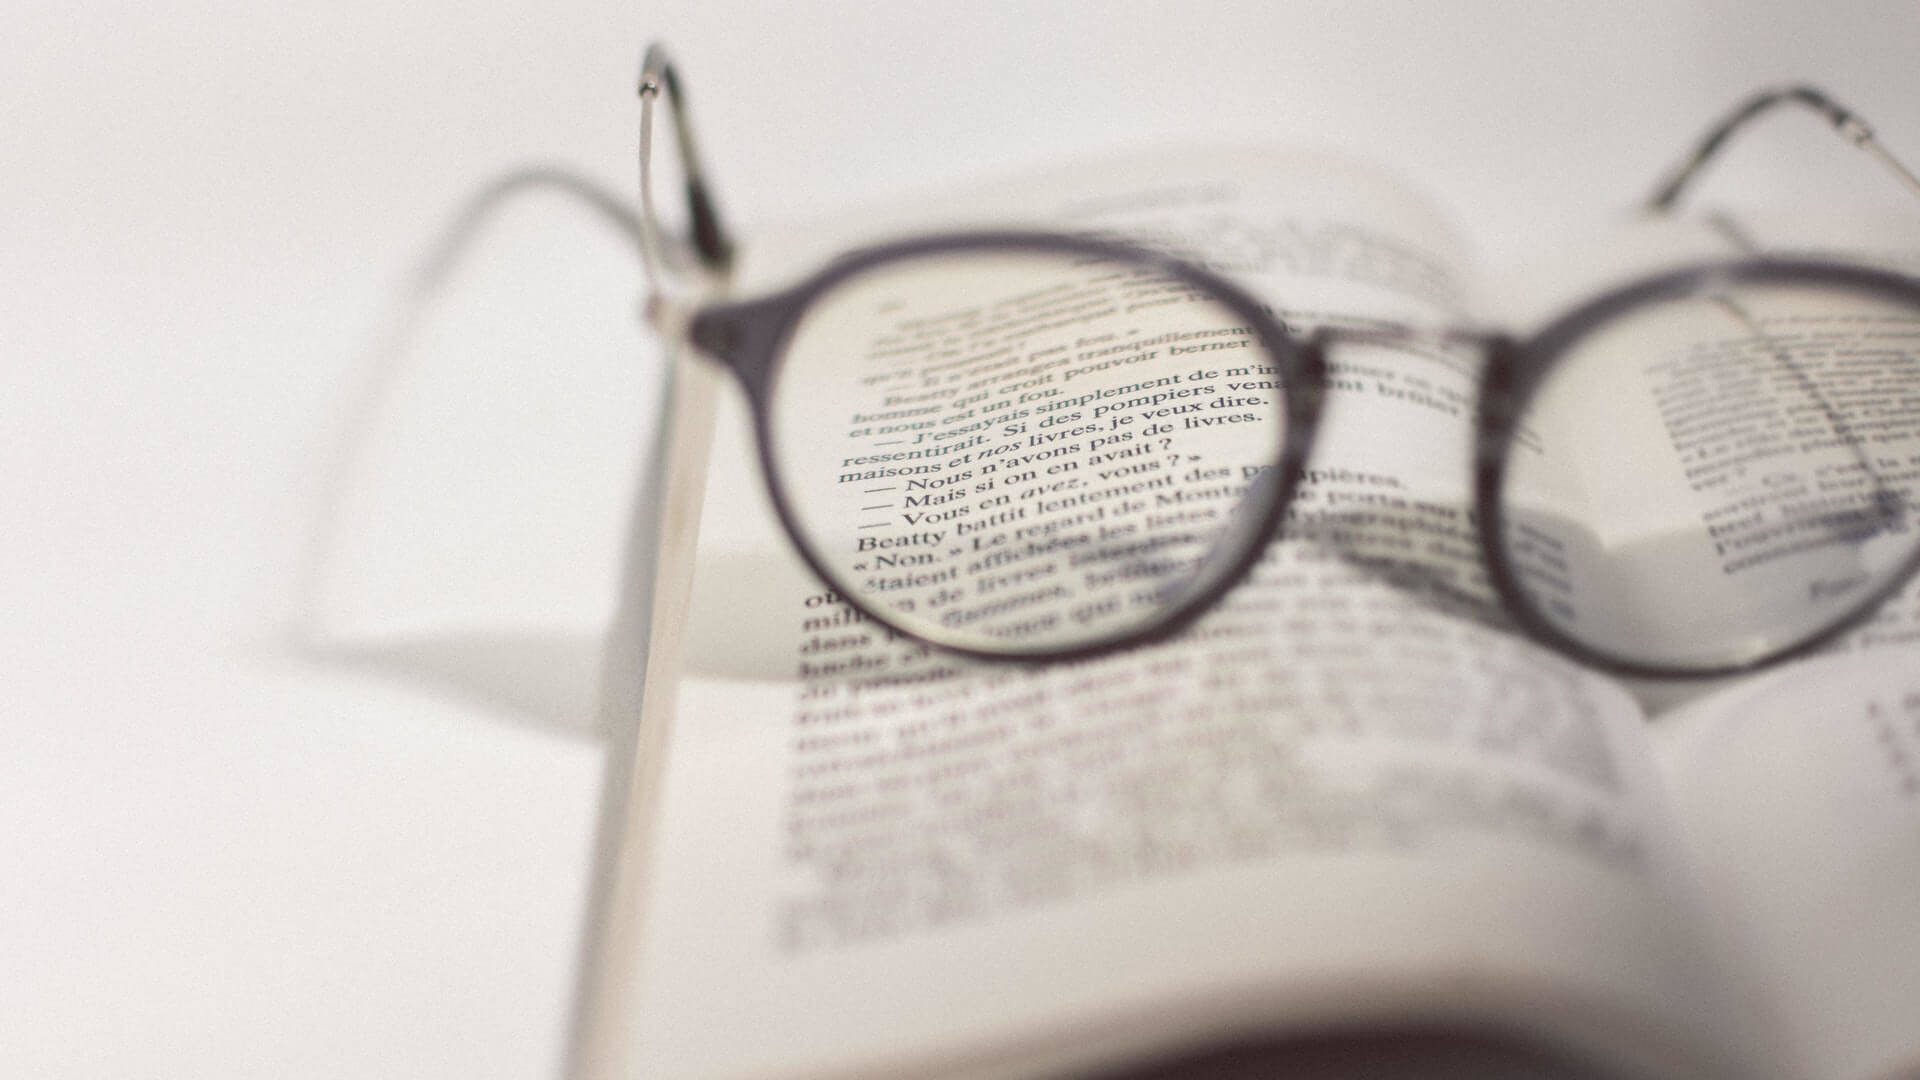 Glasses over a book containing French pronouns